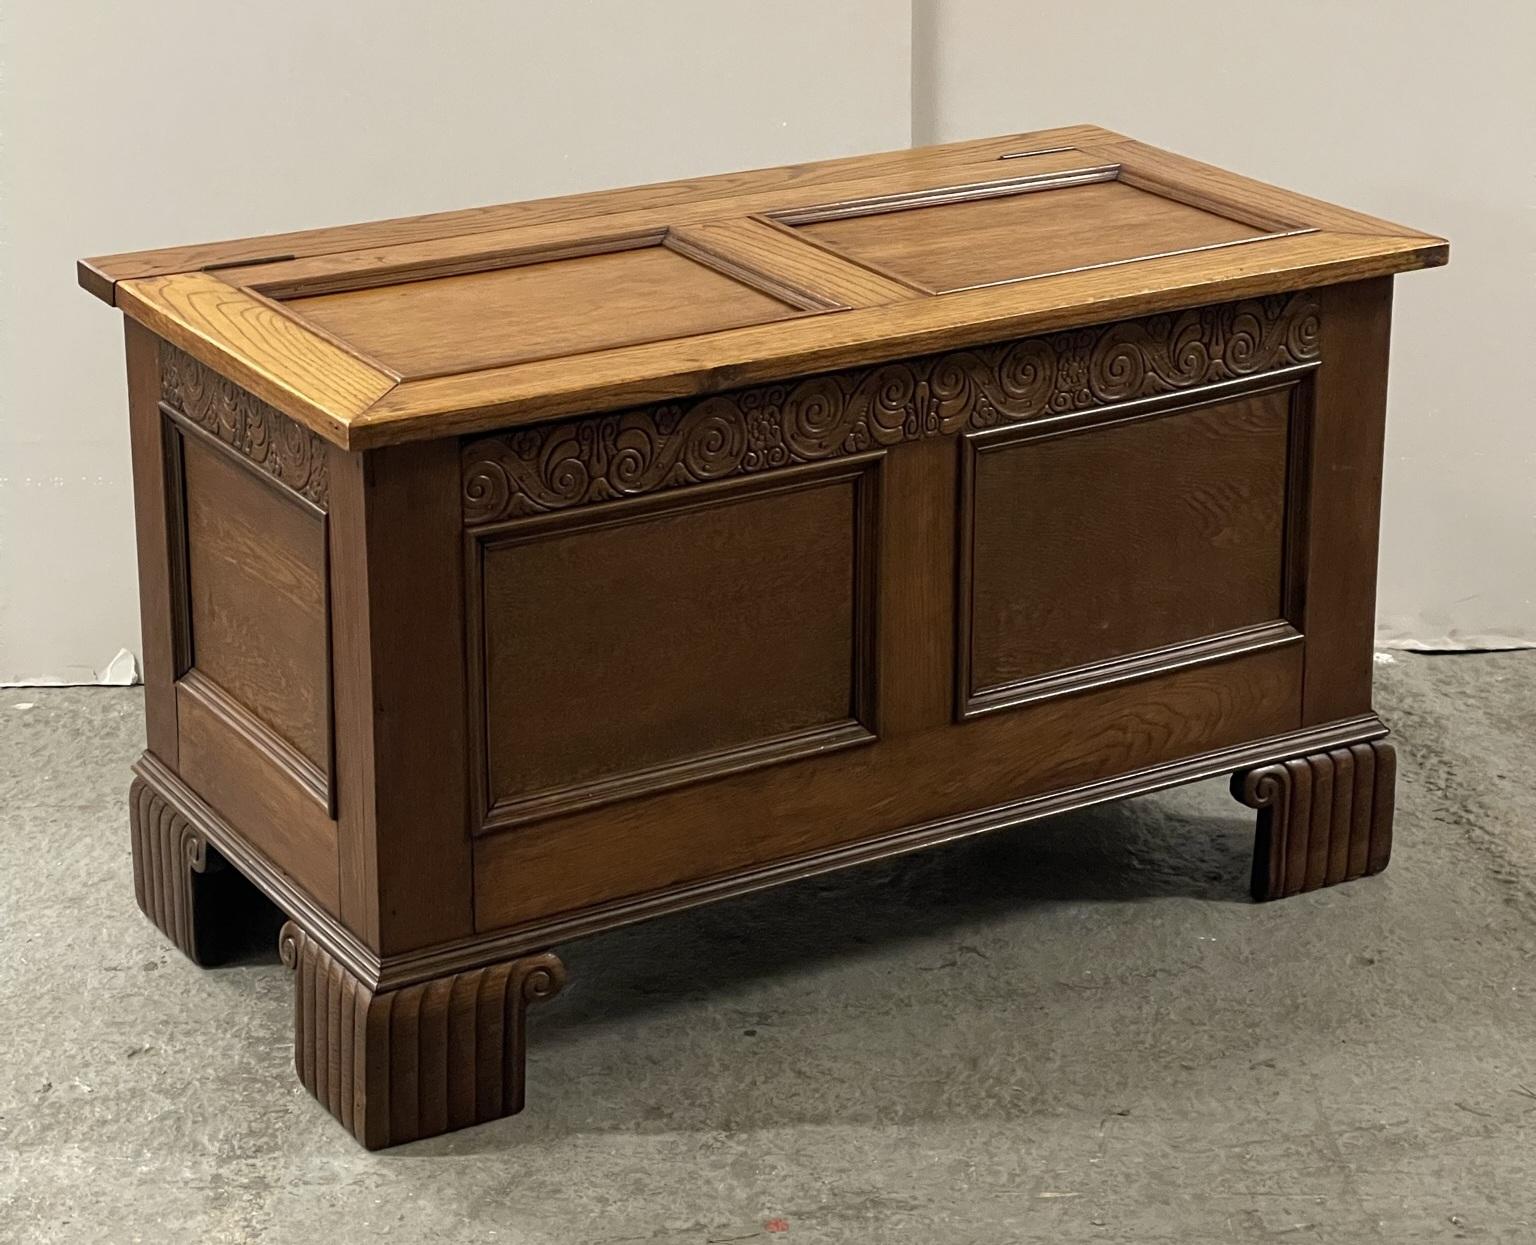 Here we have for sale an early 20th century oak blanket chest on bracket feet with scroll-carved detailing.

Overall, the chest is in great condition with a few minor signs of wear, it has been cleaned and polished ready for its new